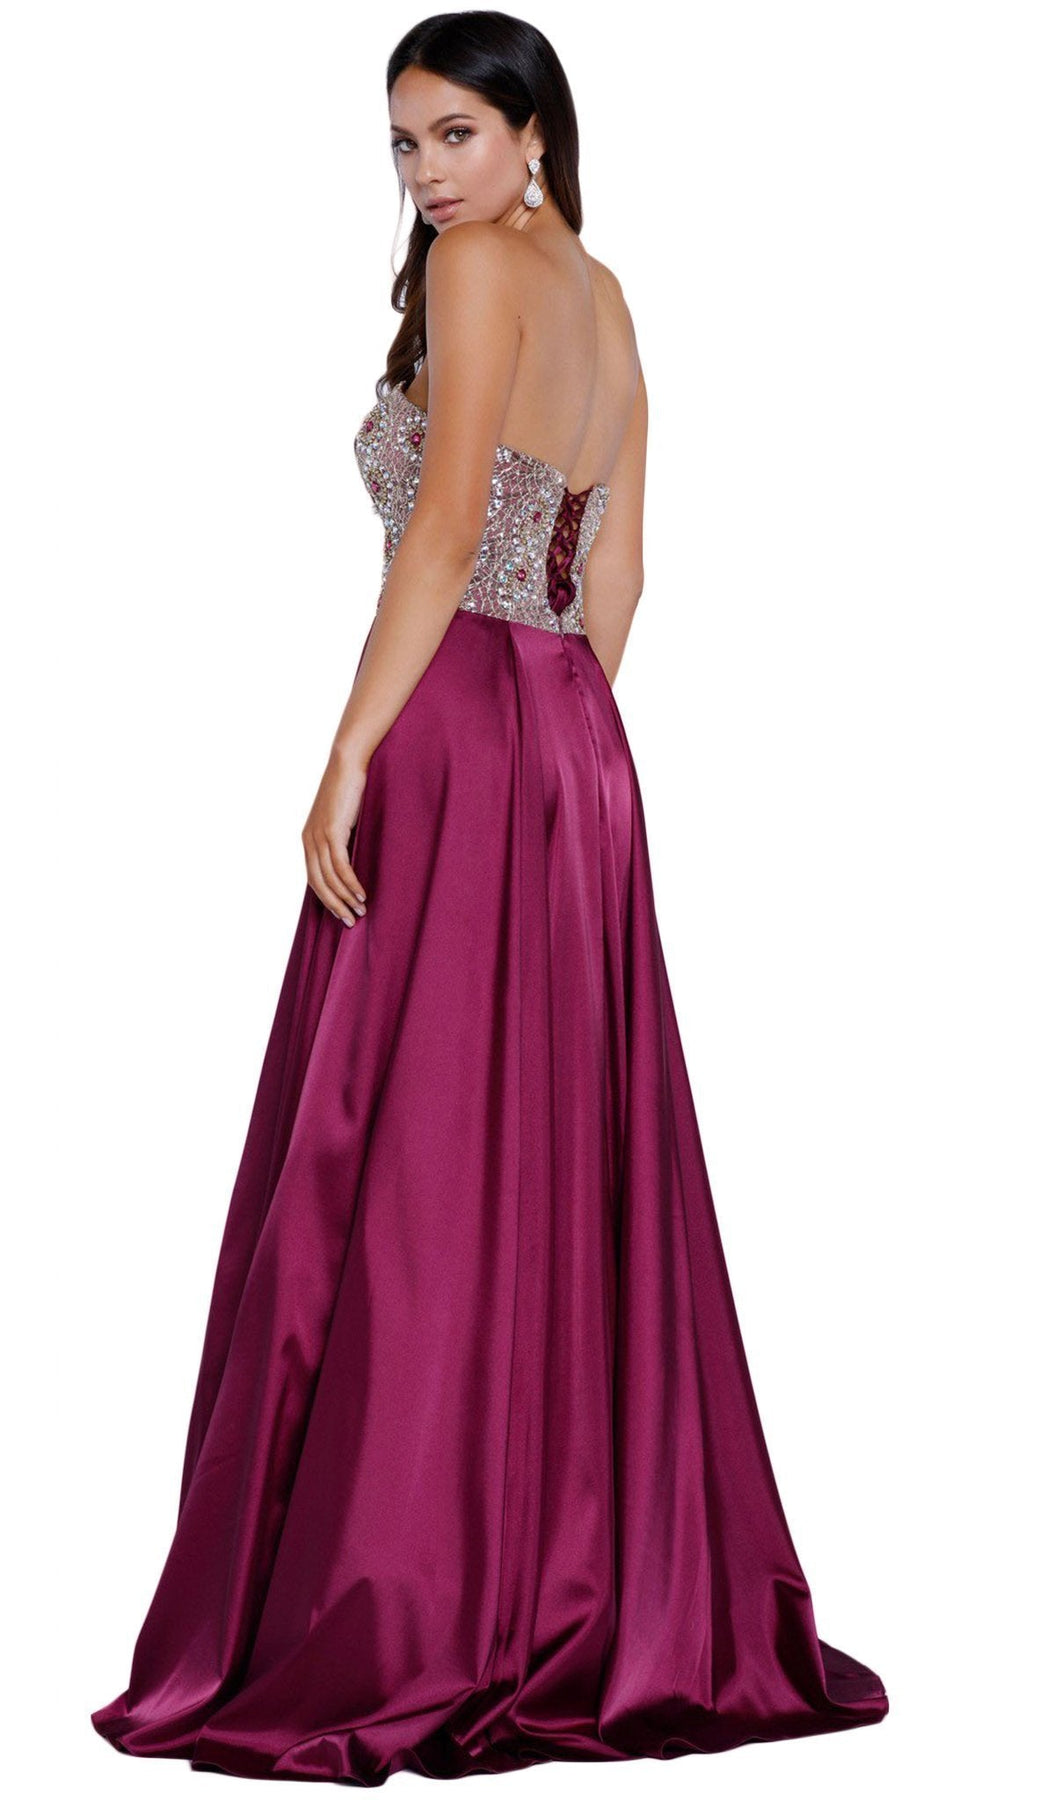 Nox Anabel - 8186 Metallic Embellished Strapless Long Evening Gown Special Occasion Dress